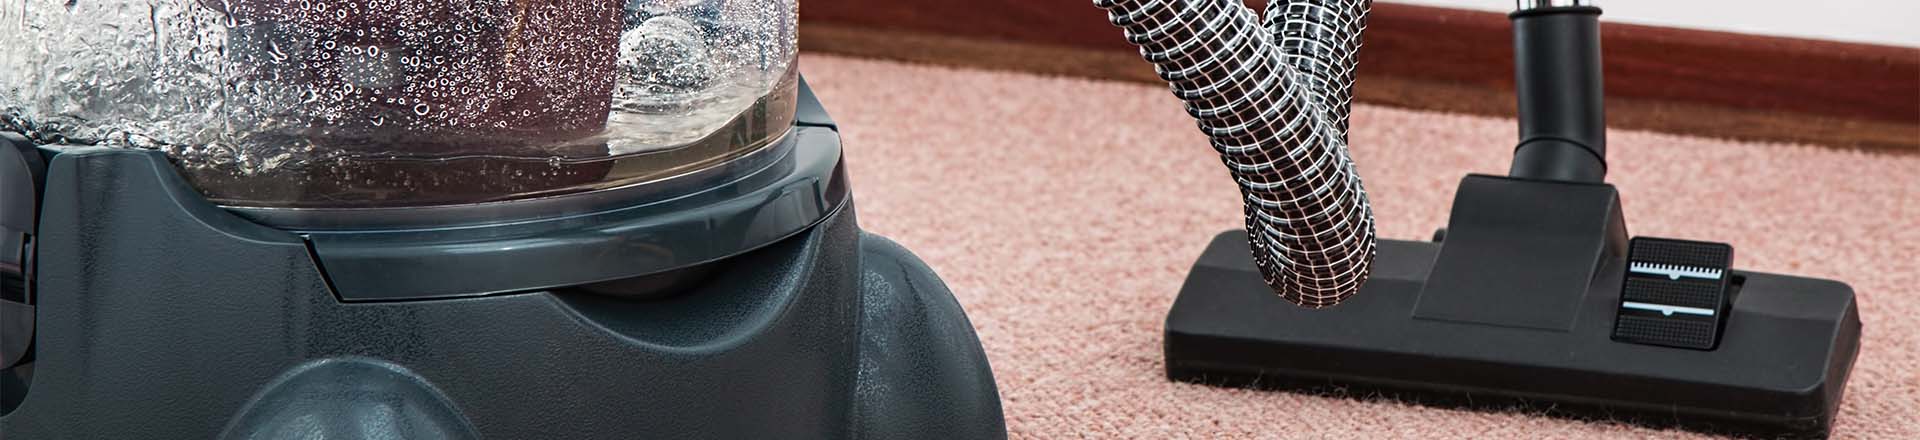 11Cleaning Carpets Prolongs their Lifespan